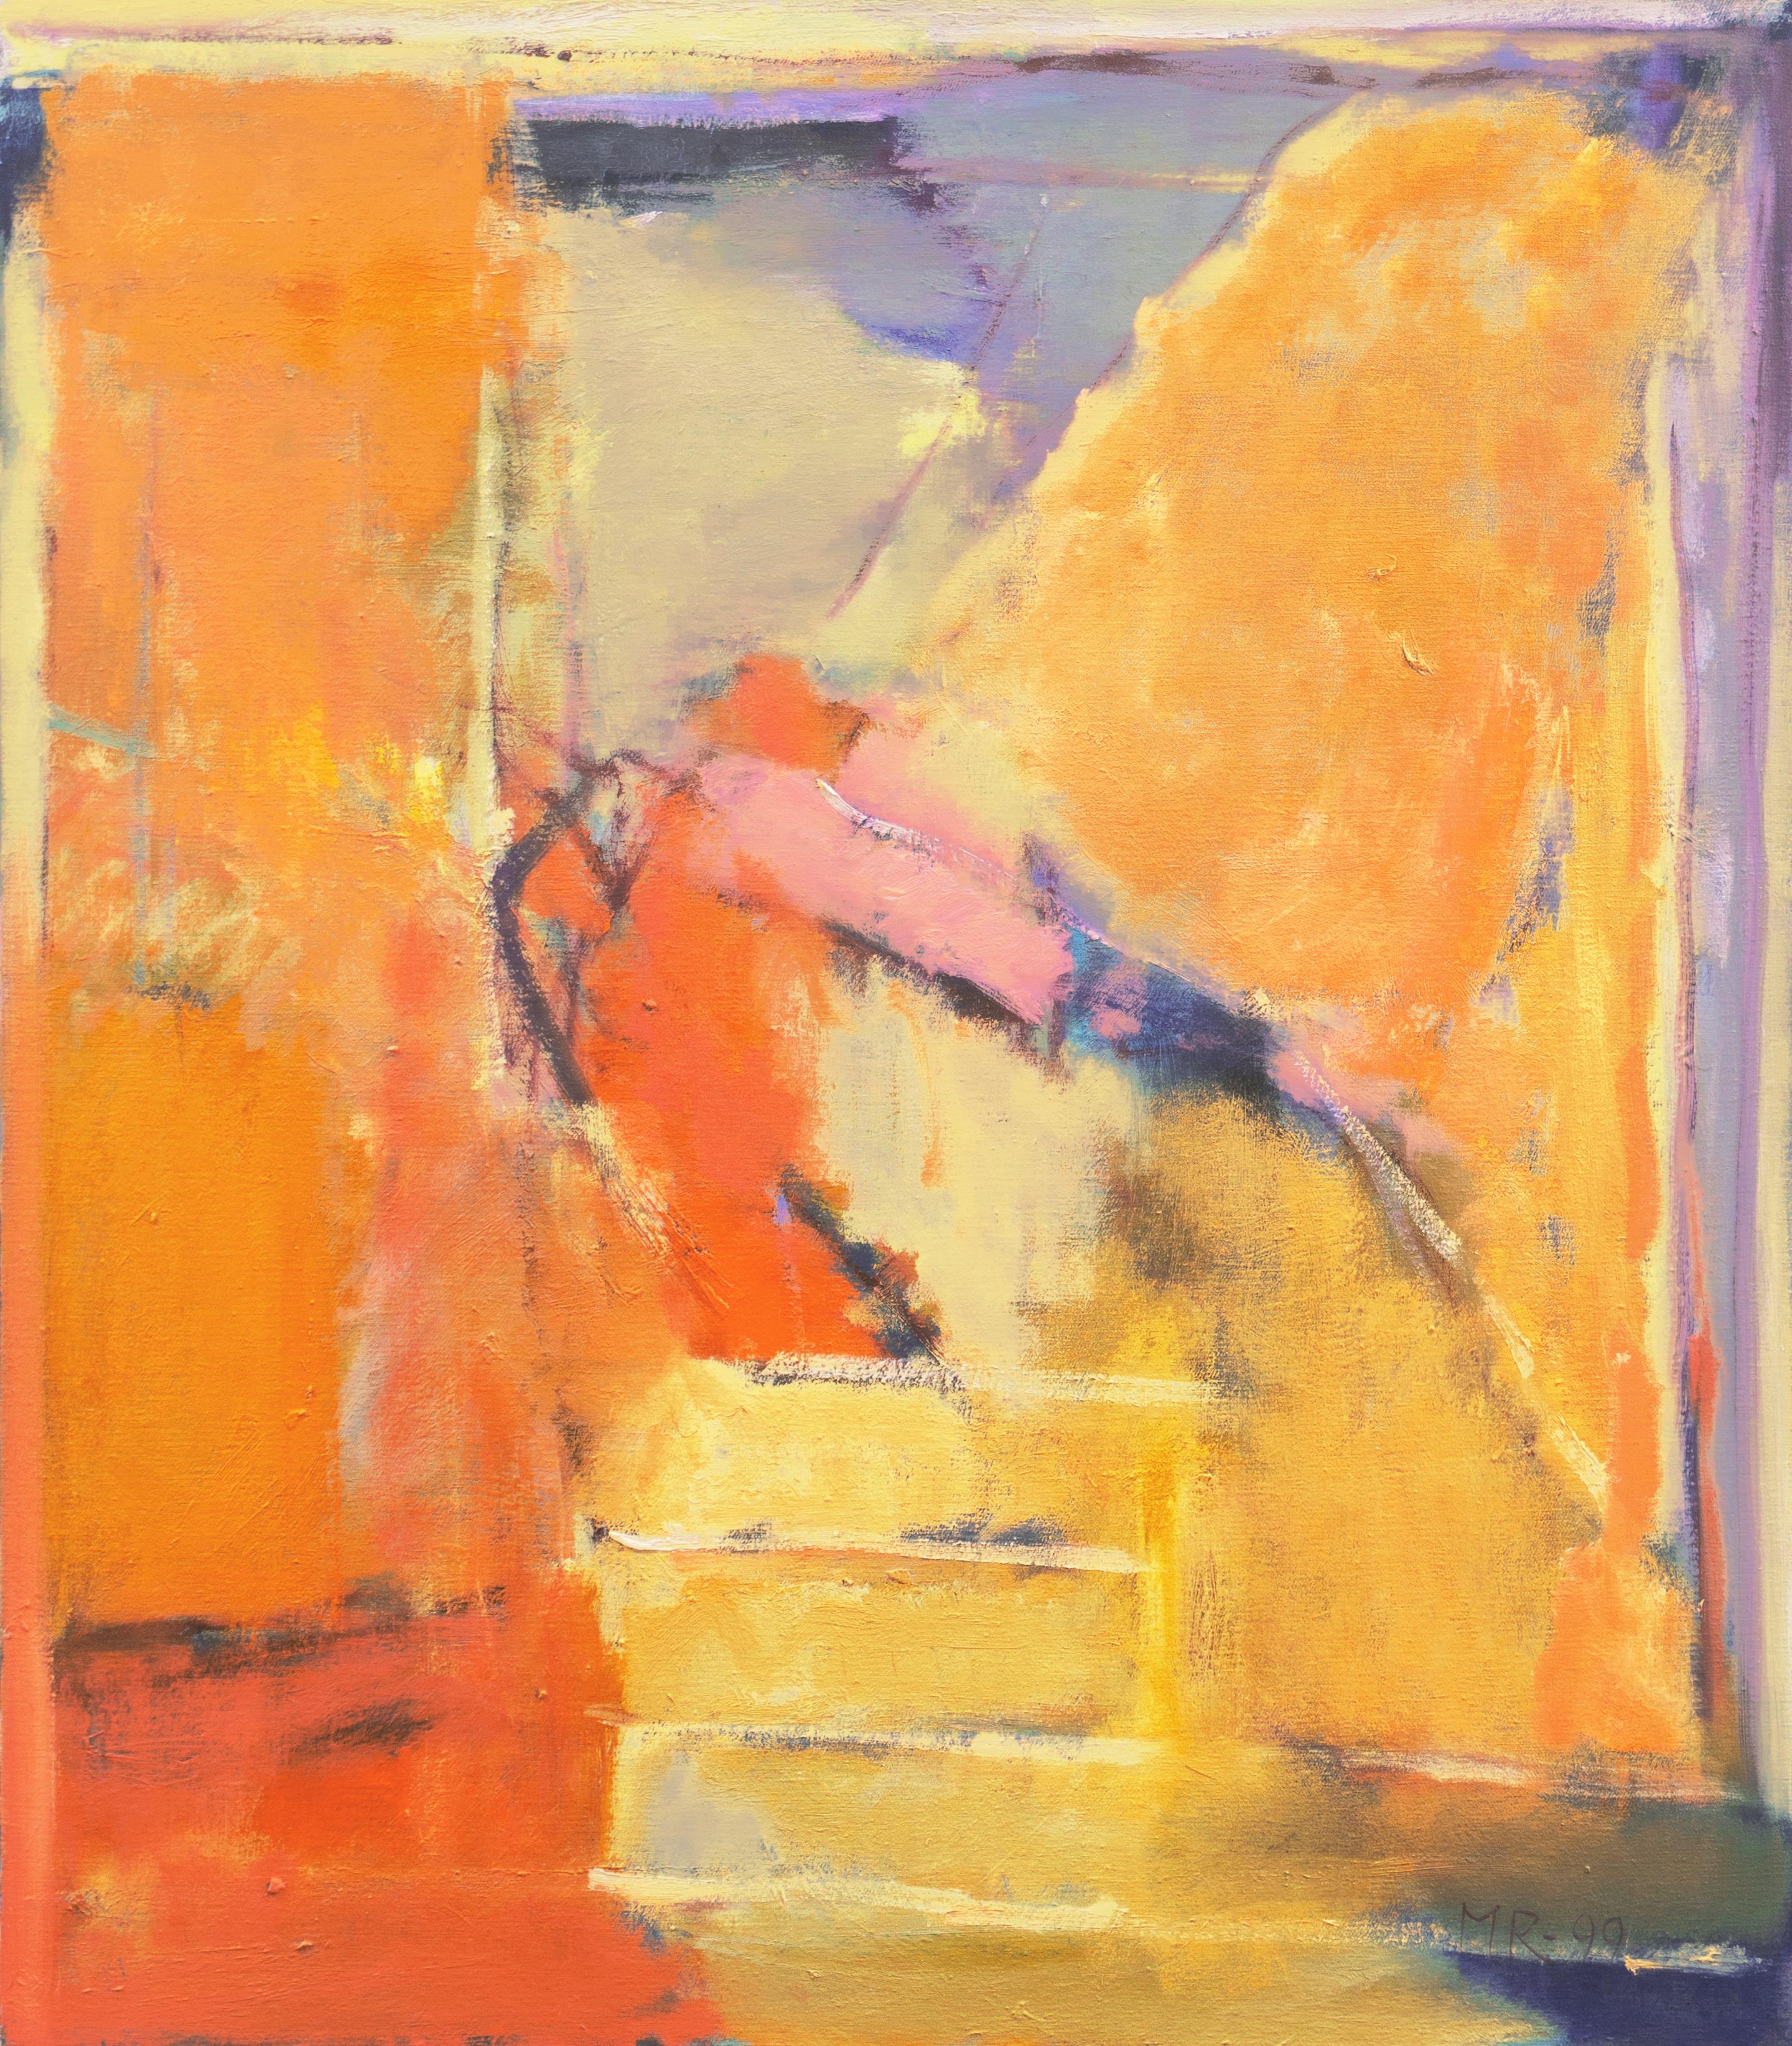 Marna Rix Abstract Painting - 'Abstract, Saffron & Lilac', Danish Woman Artist, Aarhus Art Academy, Large Oil